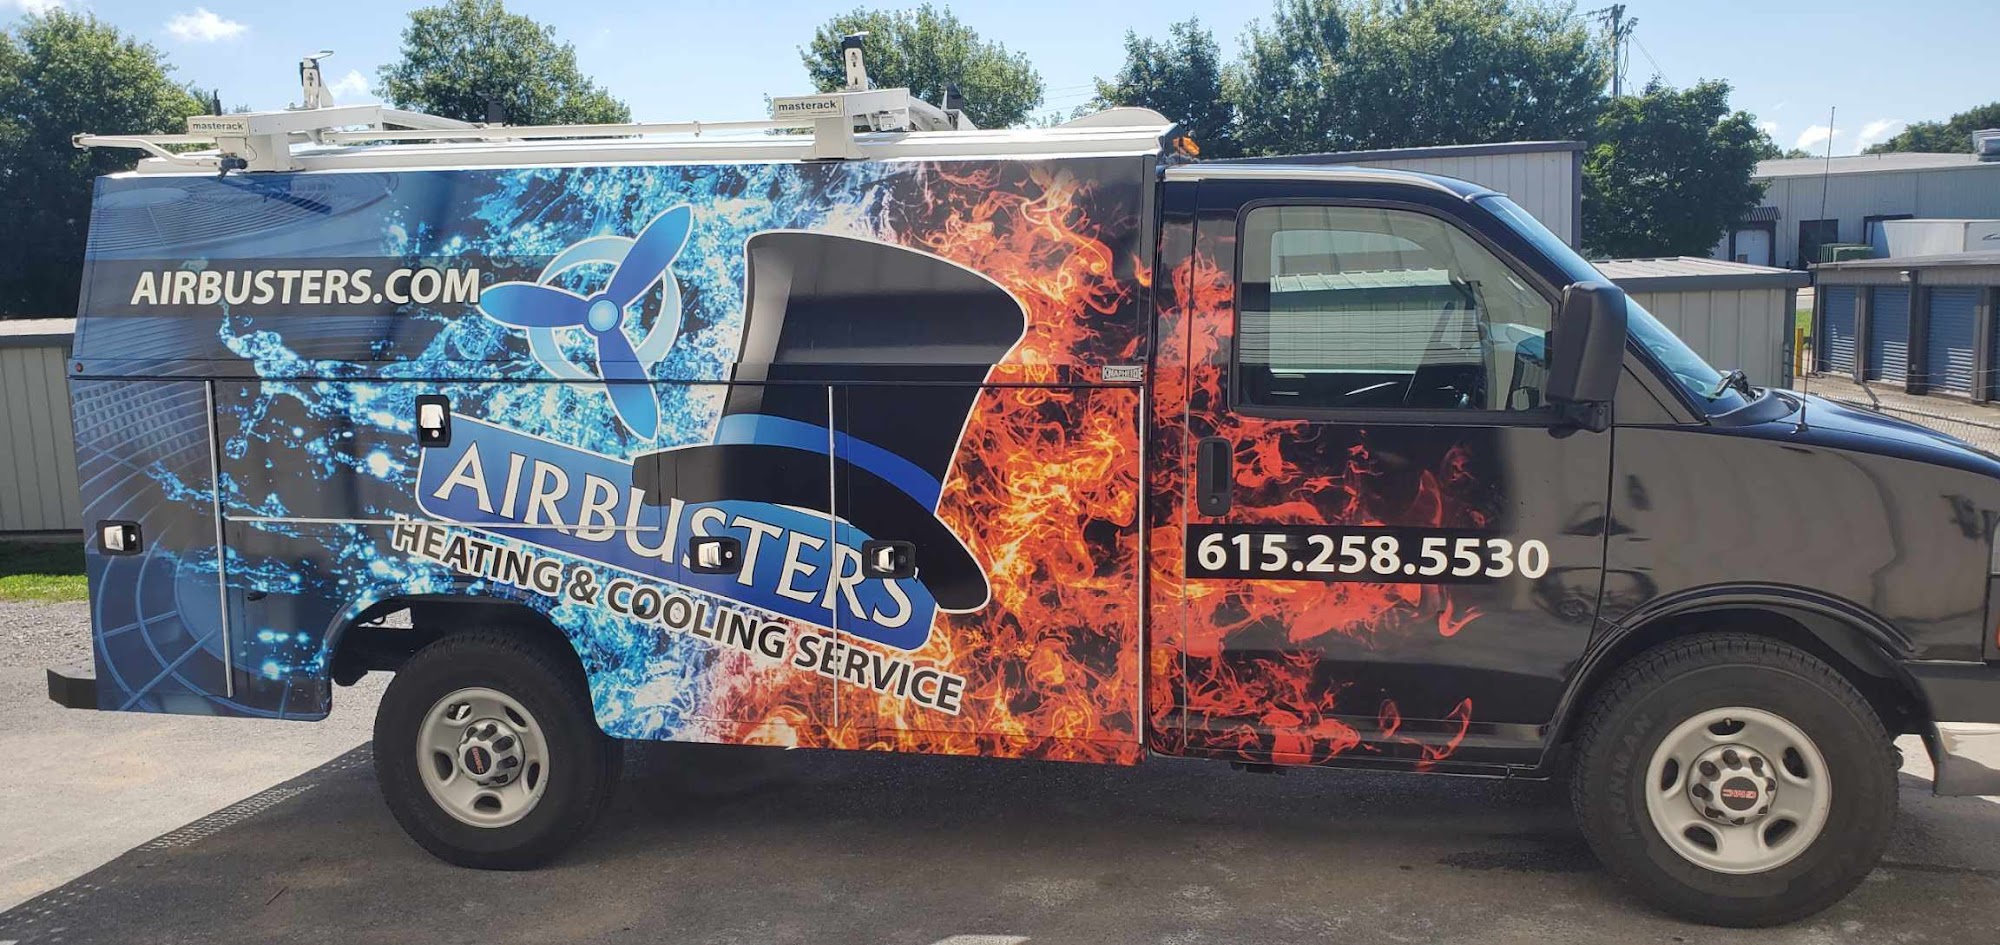 Airbusters Heating and Cooling Service